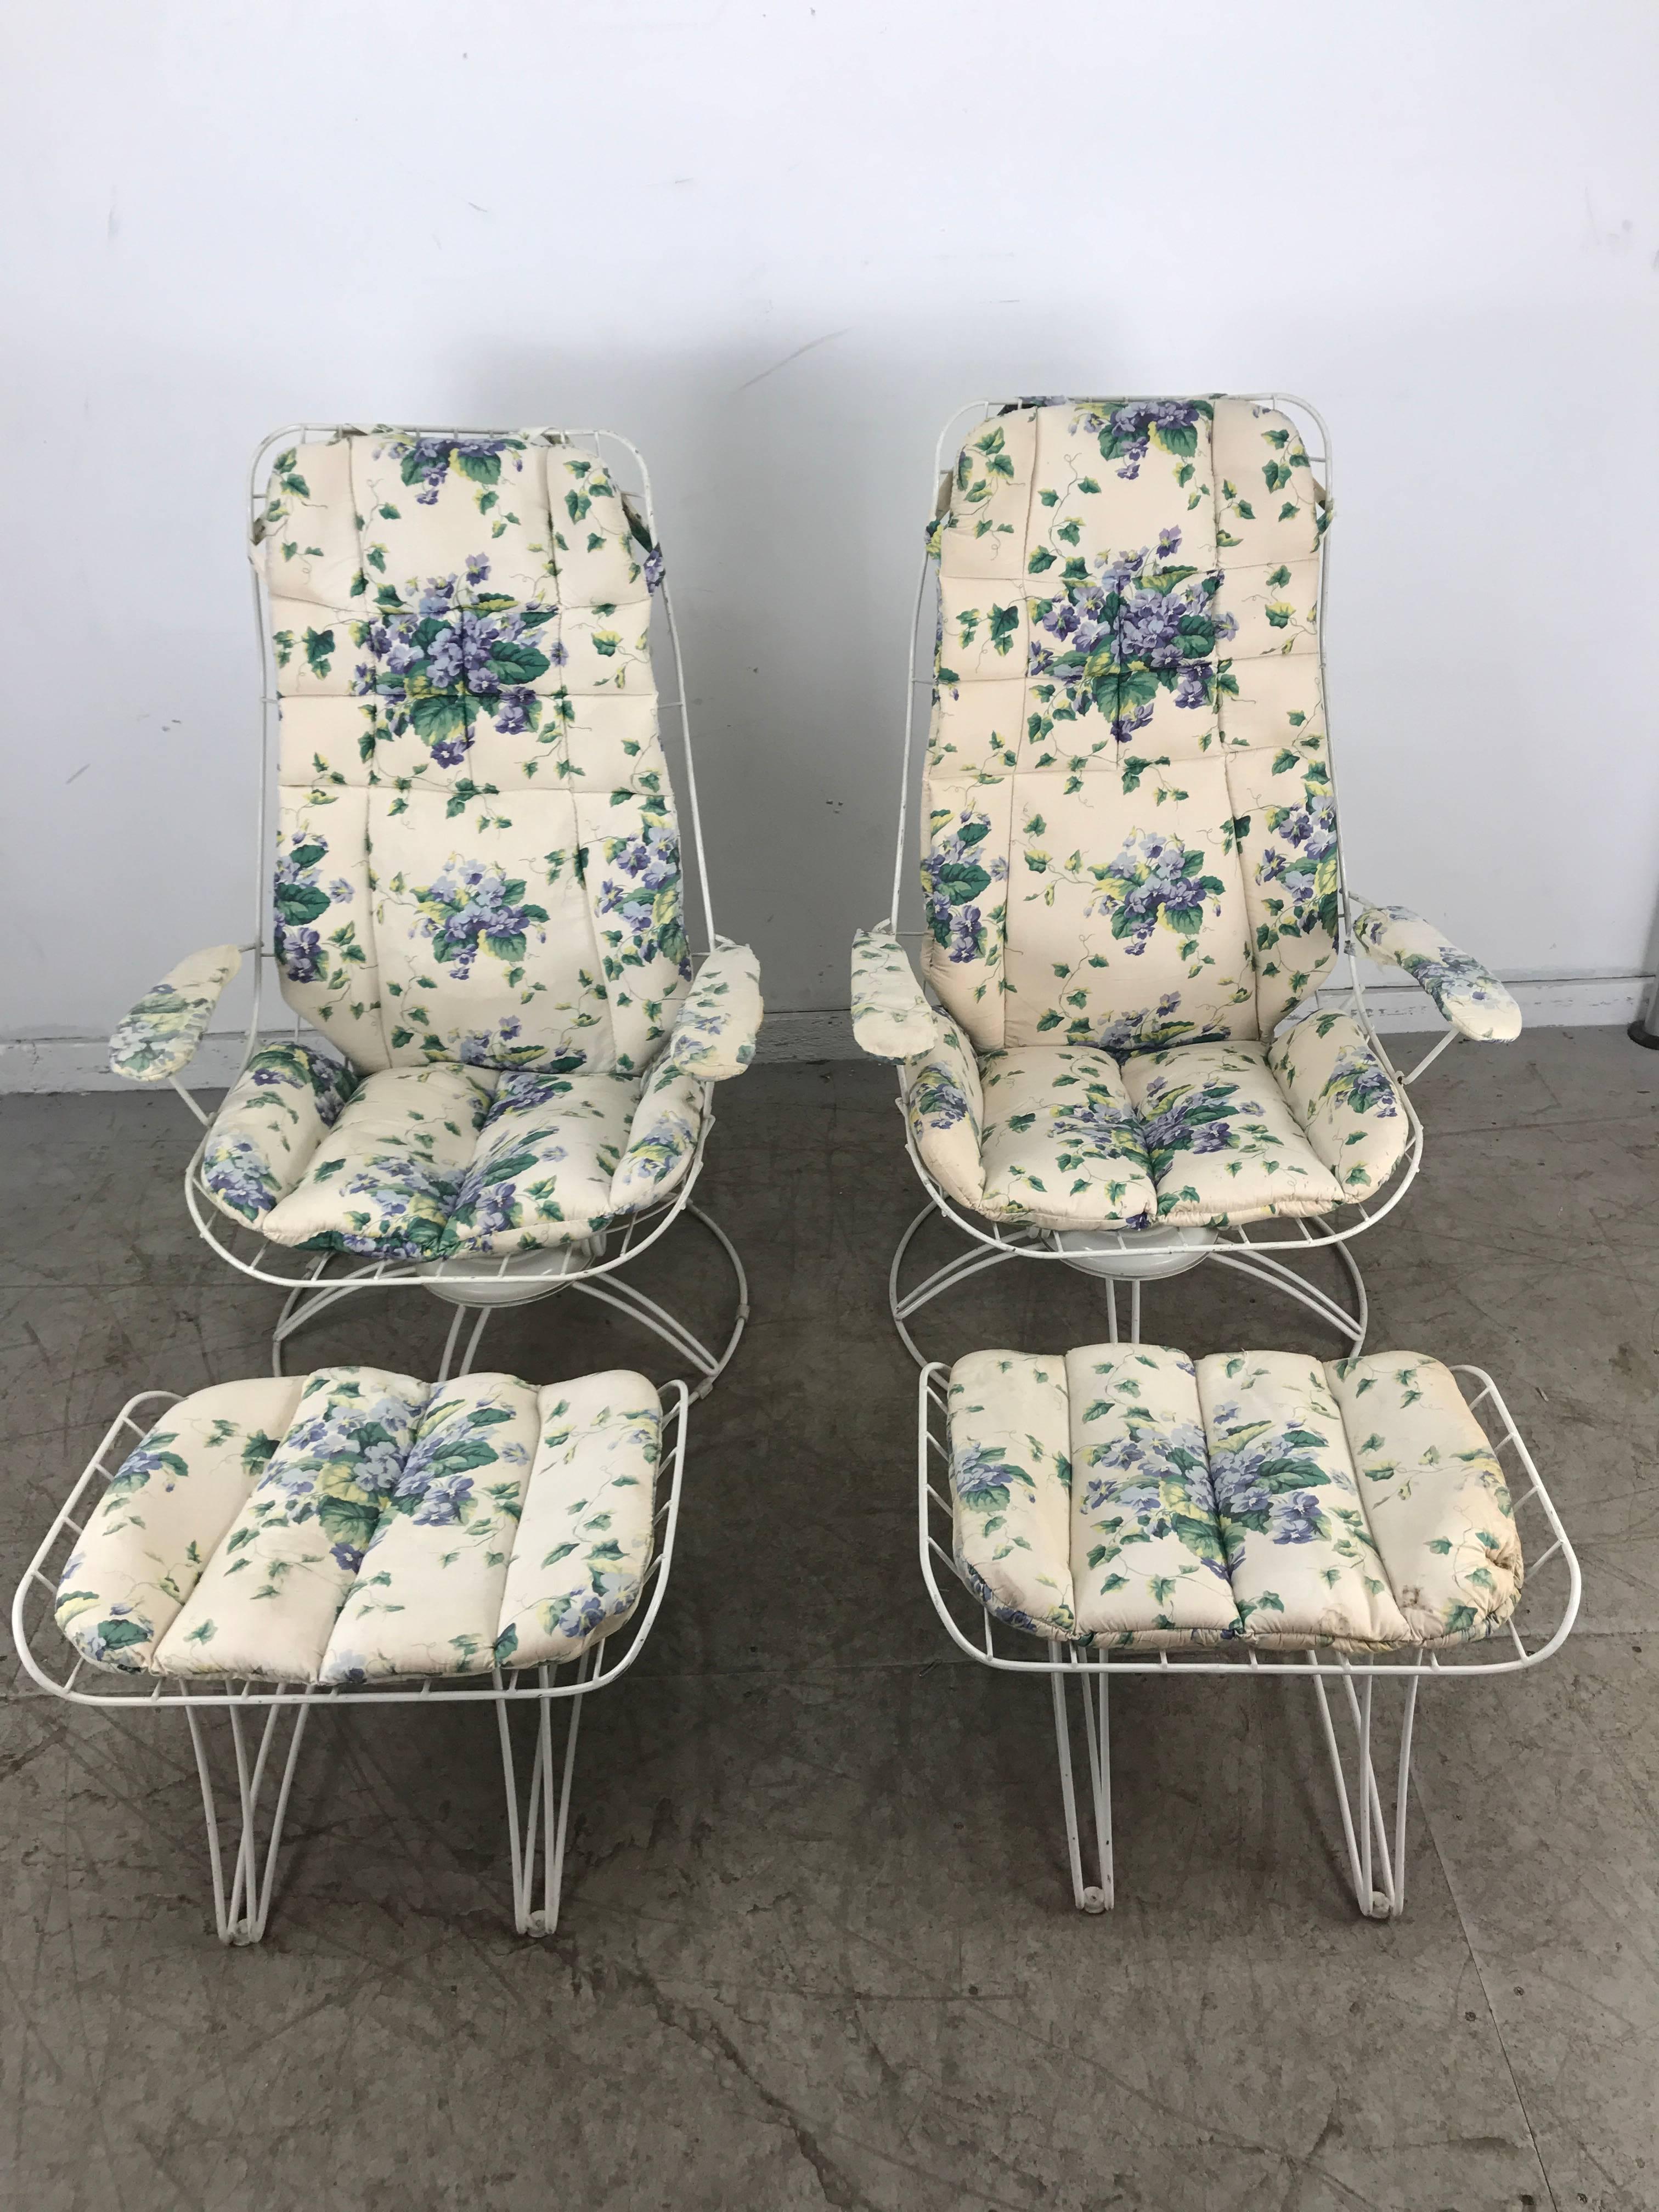 Pair of Mid-Century Modern iron tilt swivel lounge garden chairs and ottomans manufactured by Homecrest Furniture. Classic modernist design. Four of a large group of eight pieces being offered, (see other listings) original replacement cushions